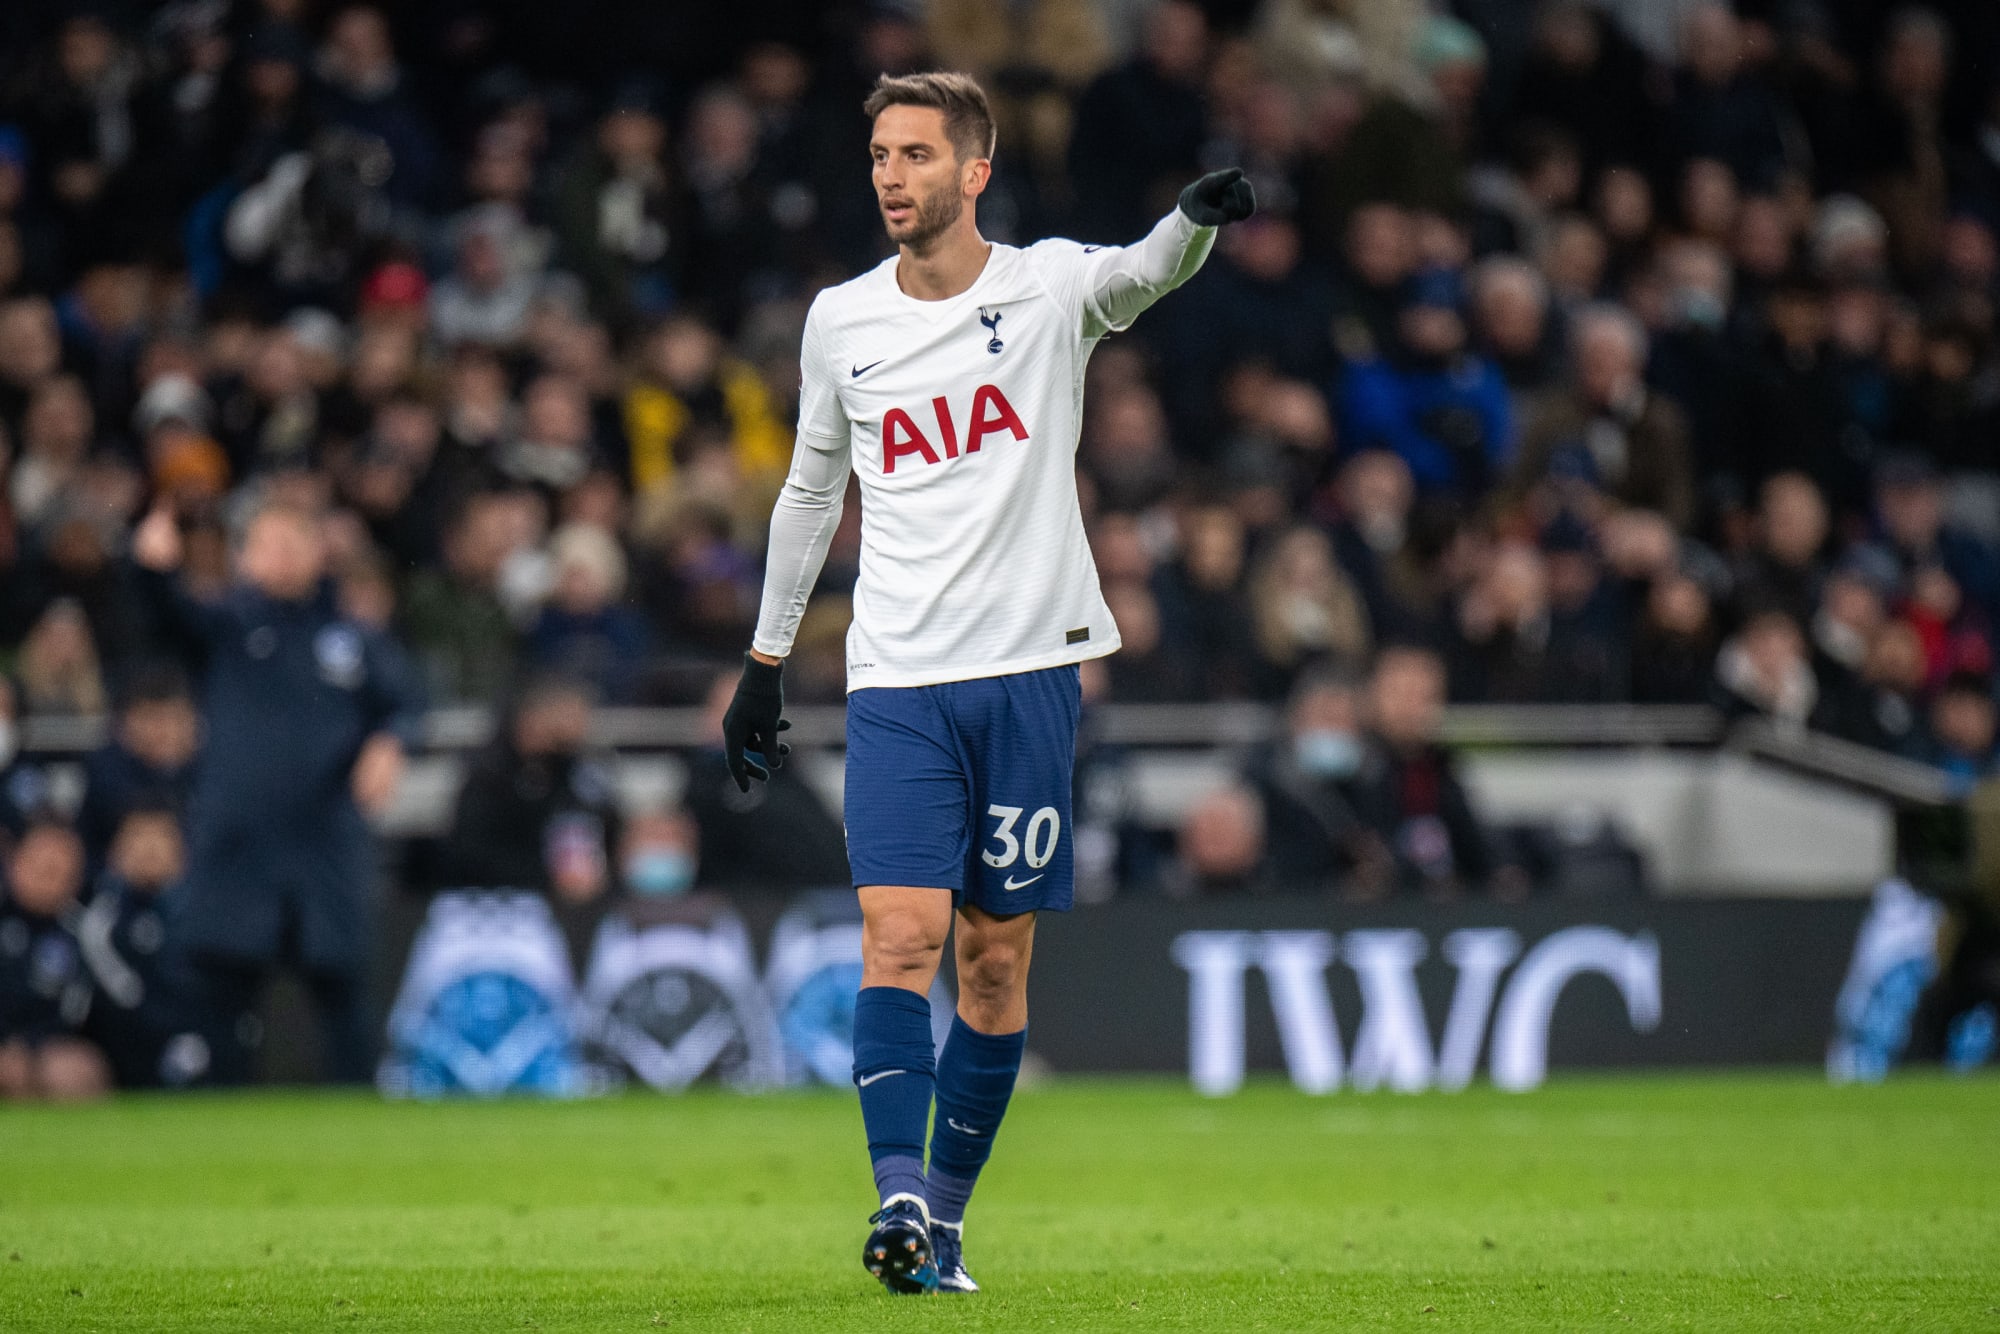 Tottenham Hotspur season may have been saved by January moves